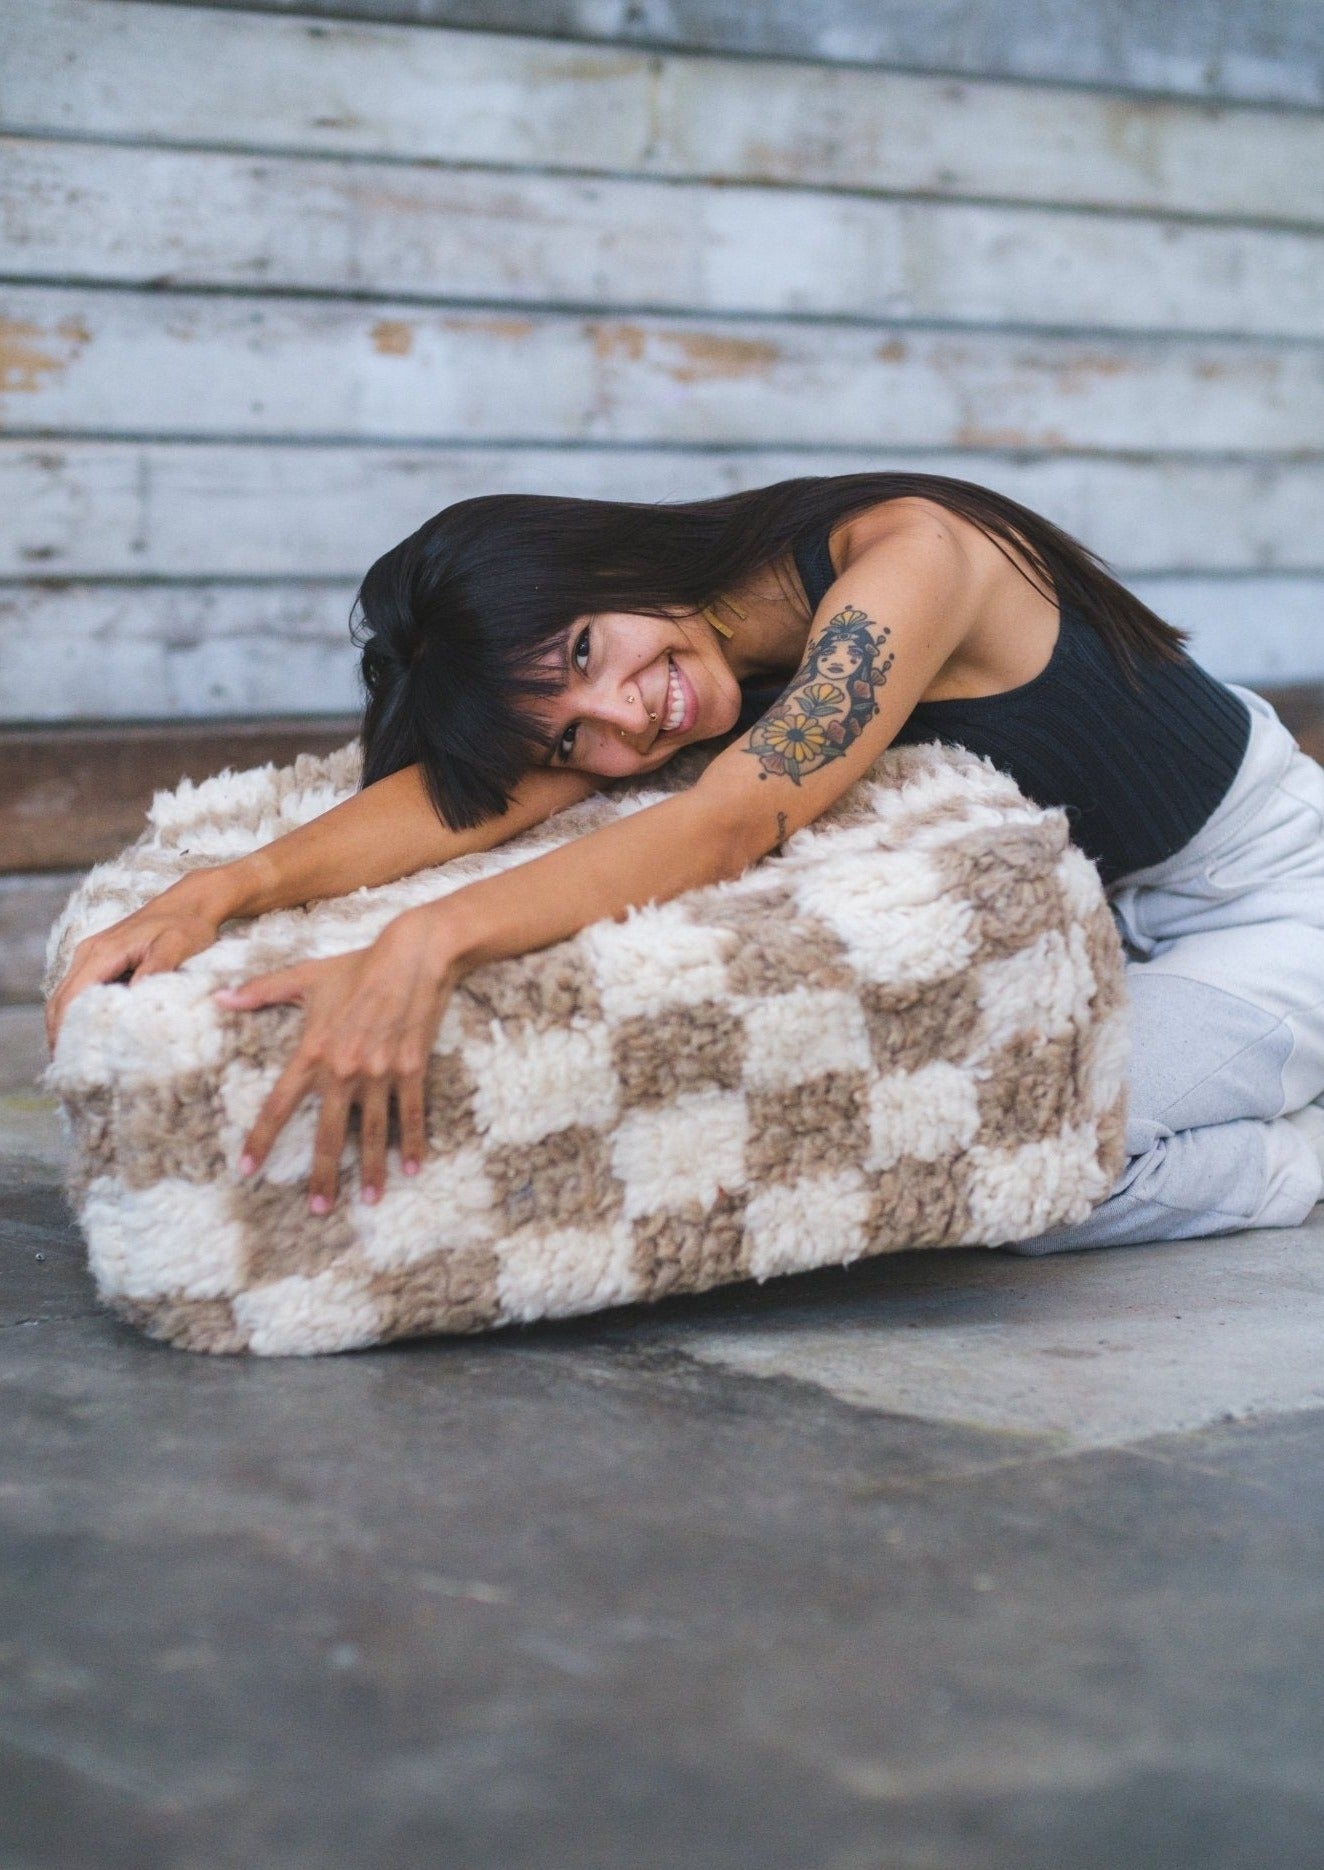 hot girl is beaming a wide smile while holding her favorite moroccan floor cushion made from 100% wool. background wall is rustic and floors are cement. tatoo on left arm bangs and long hair 